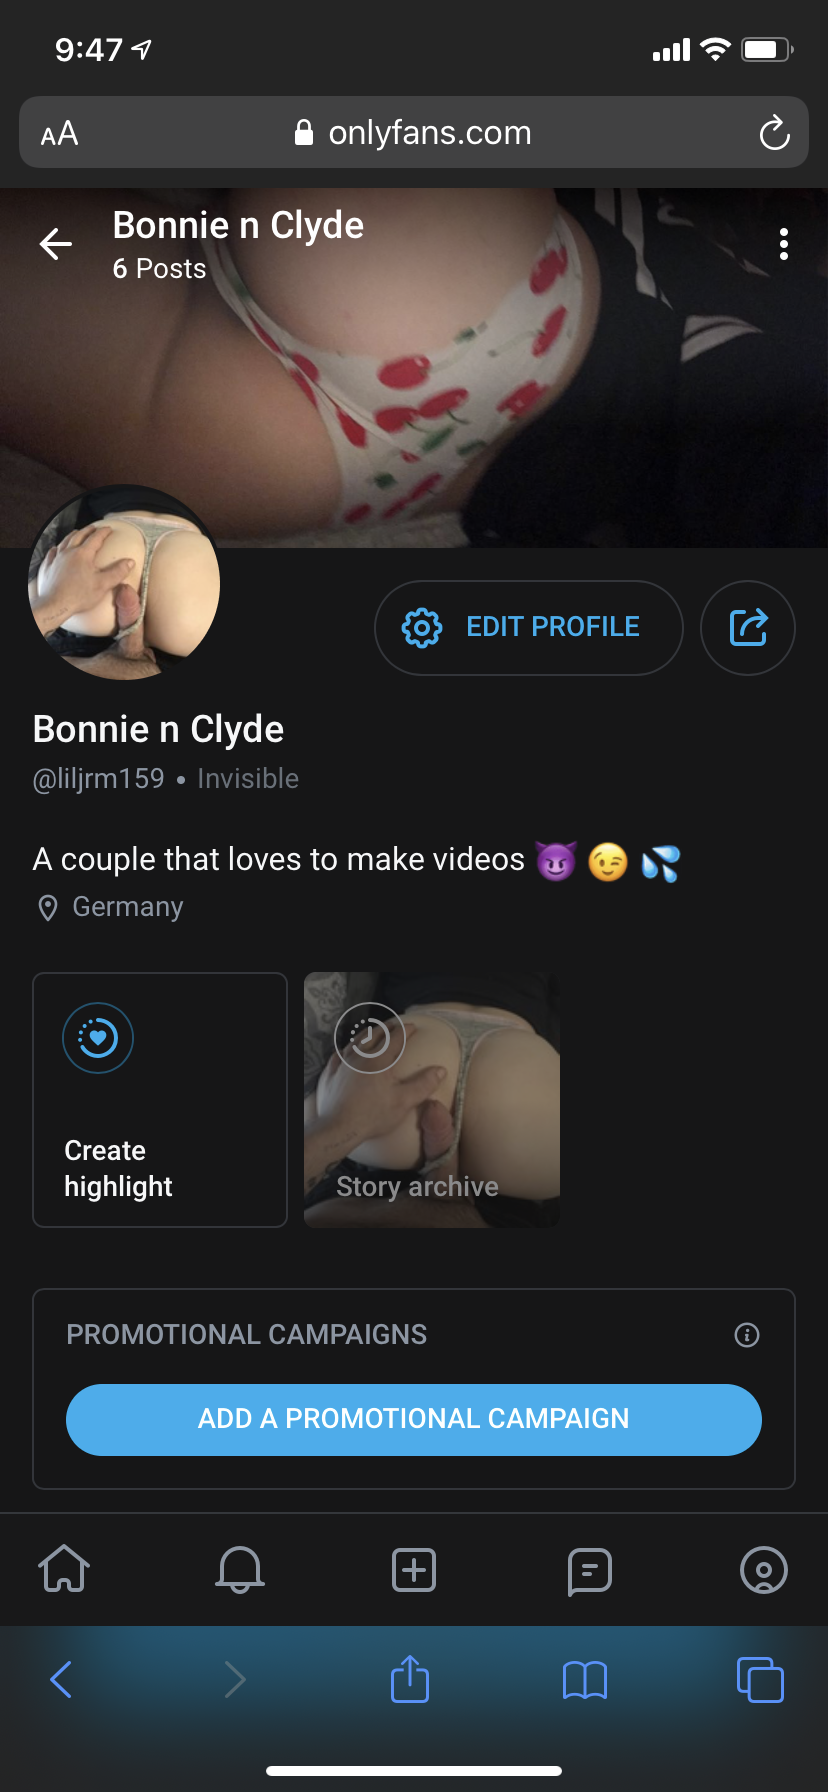 Photo by Bonnie n clyde with the username @liljman58,  August 26, 2020 at 10:05 PM